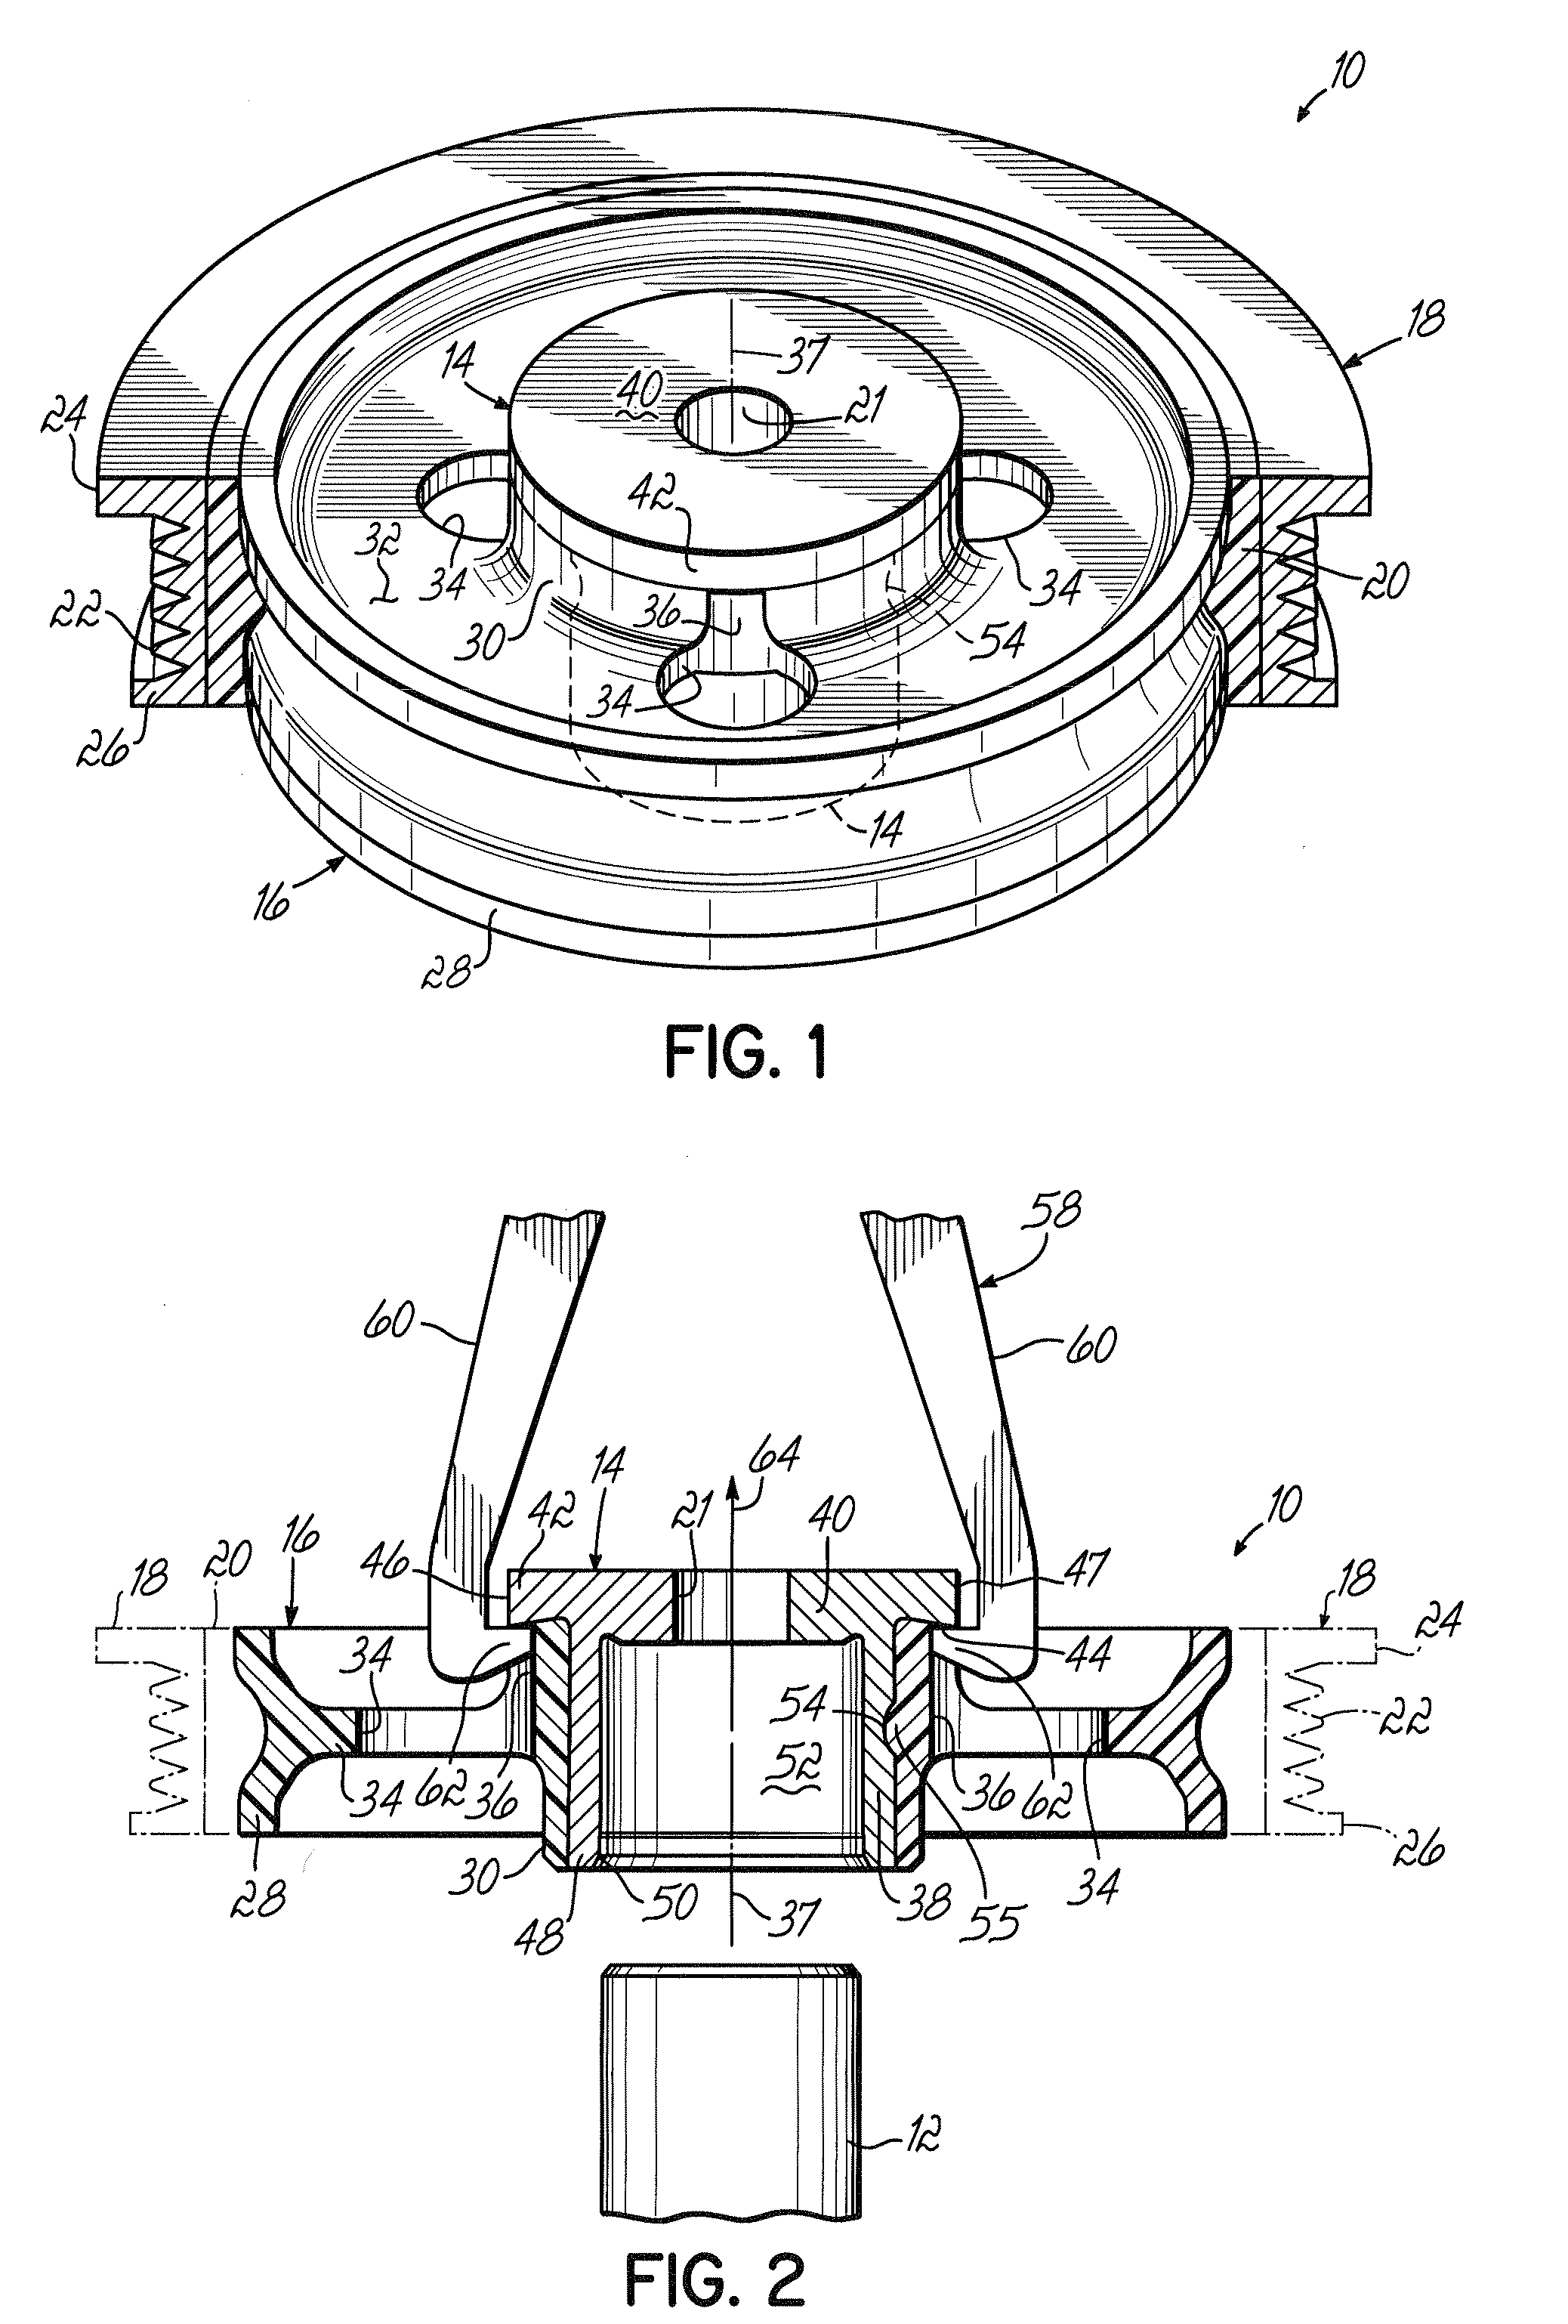 Coupling structure mountable to a rotatable shaft